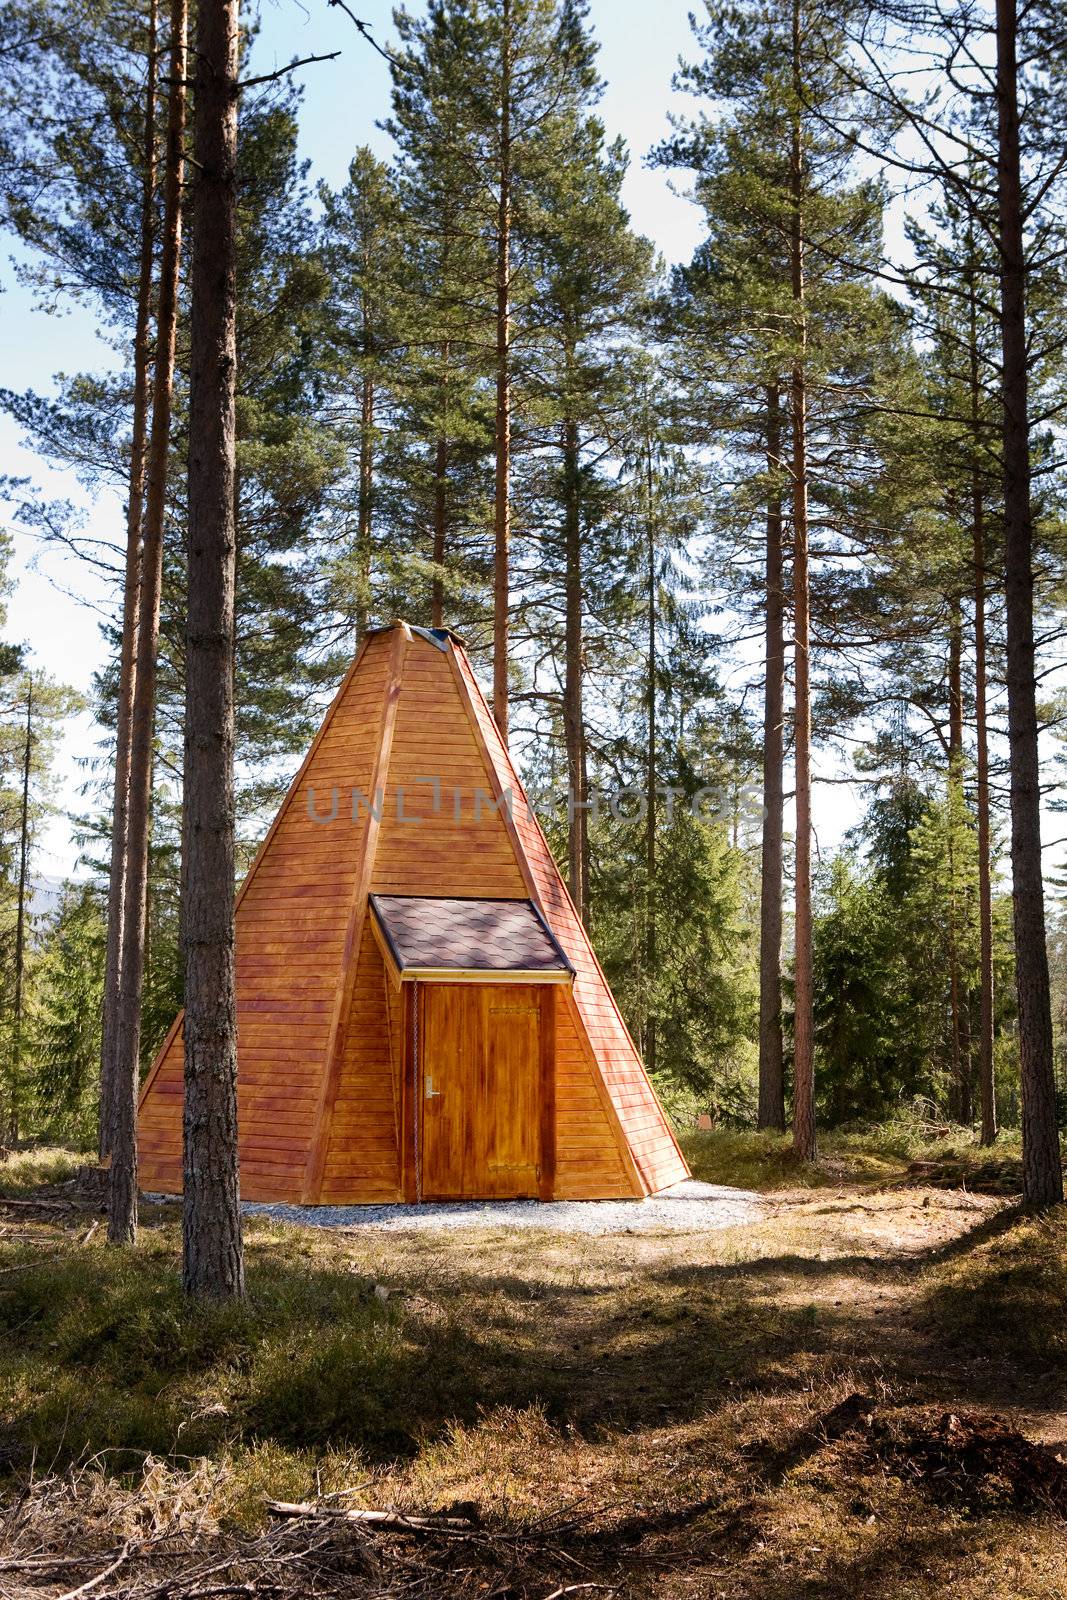 A teepee cabin hut in the forest